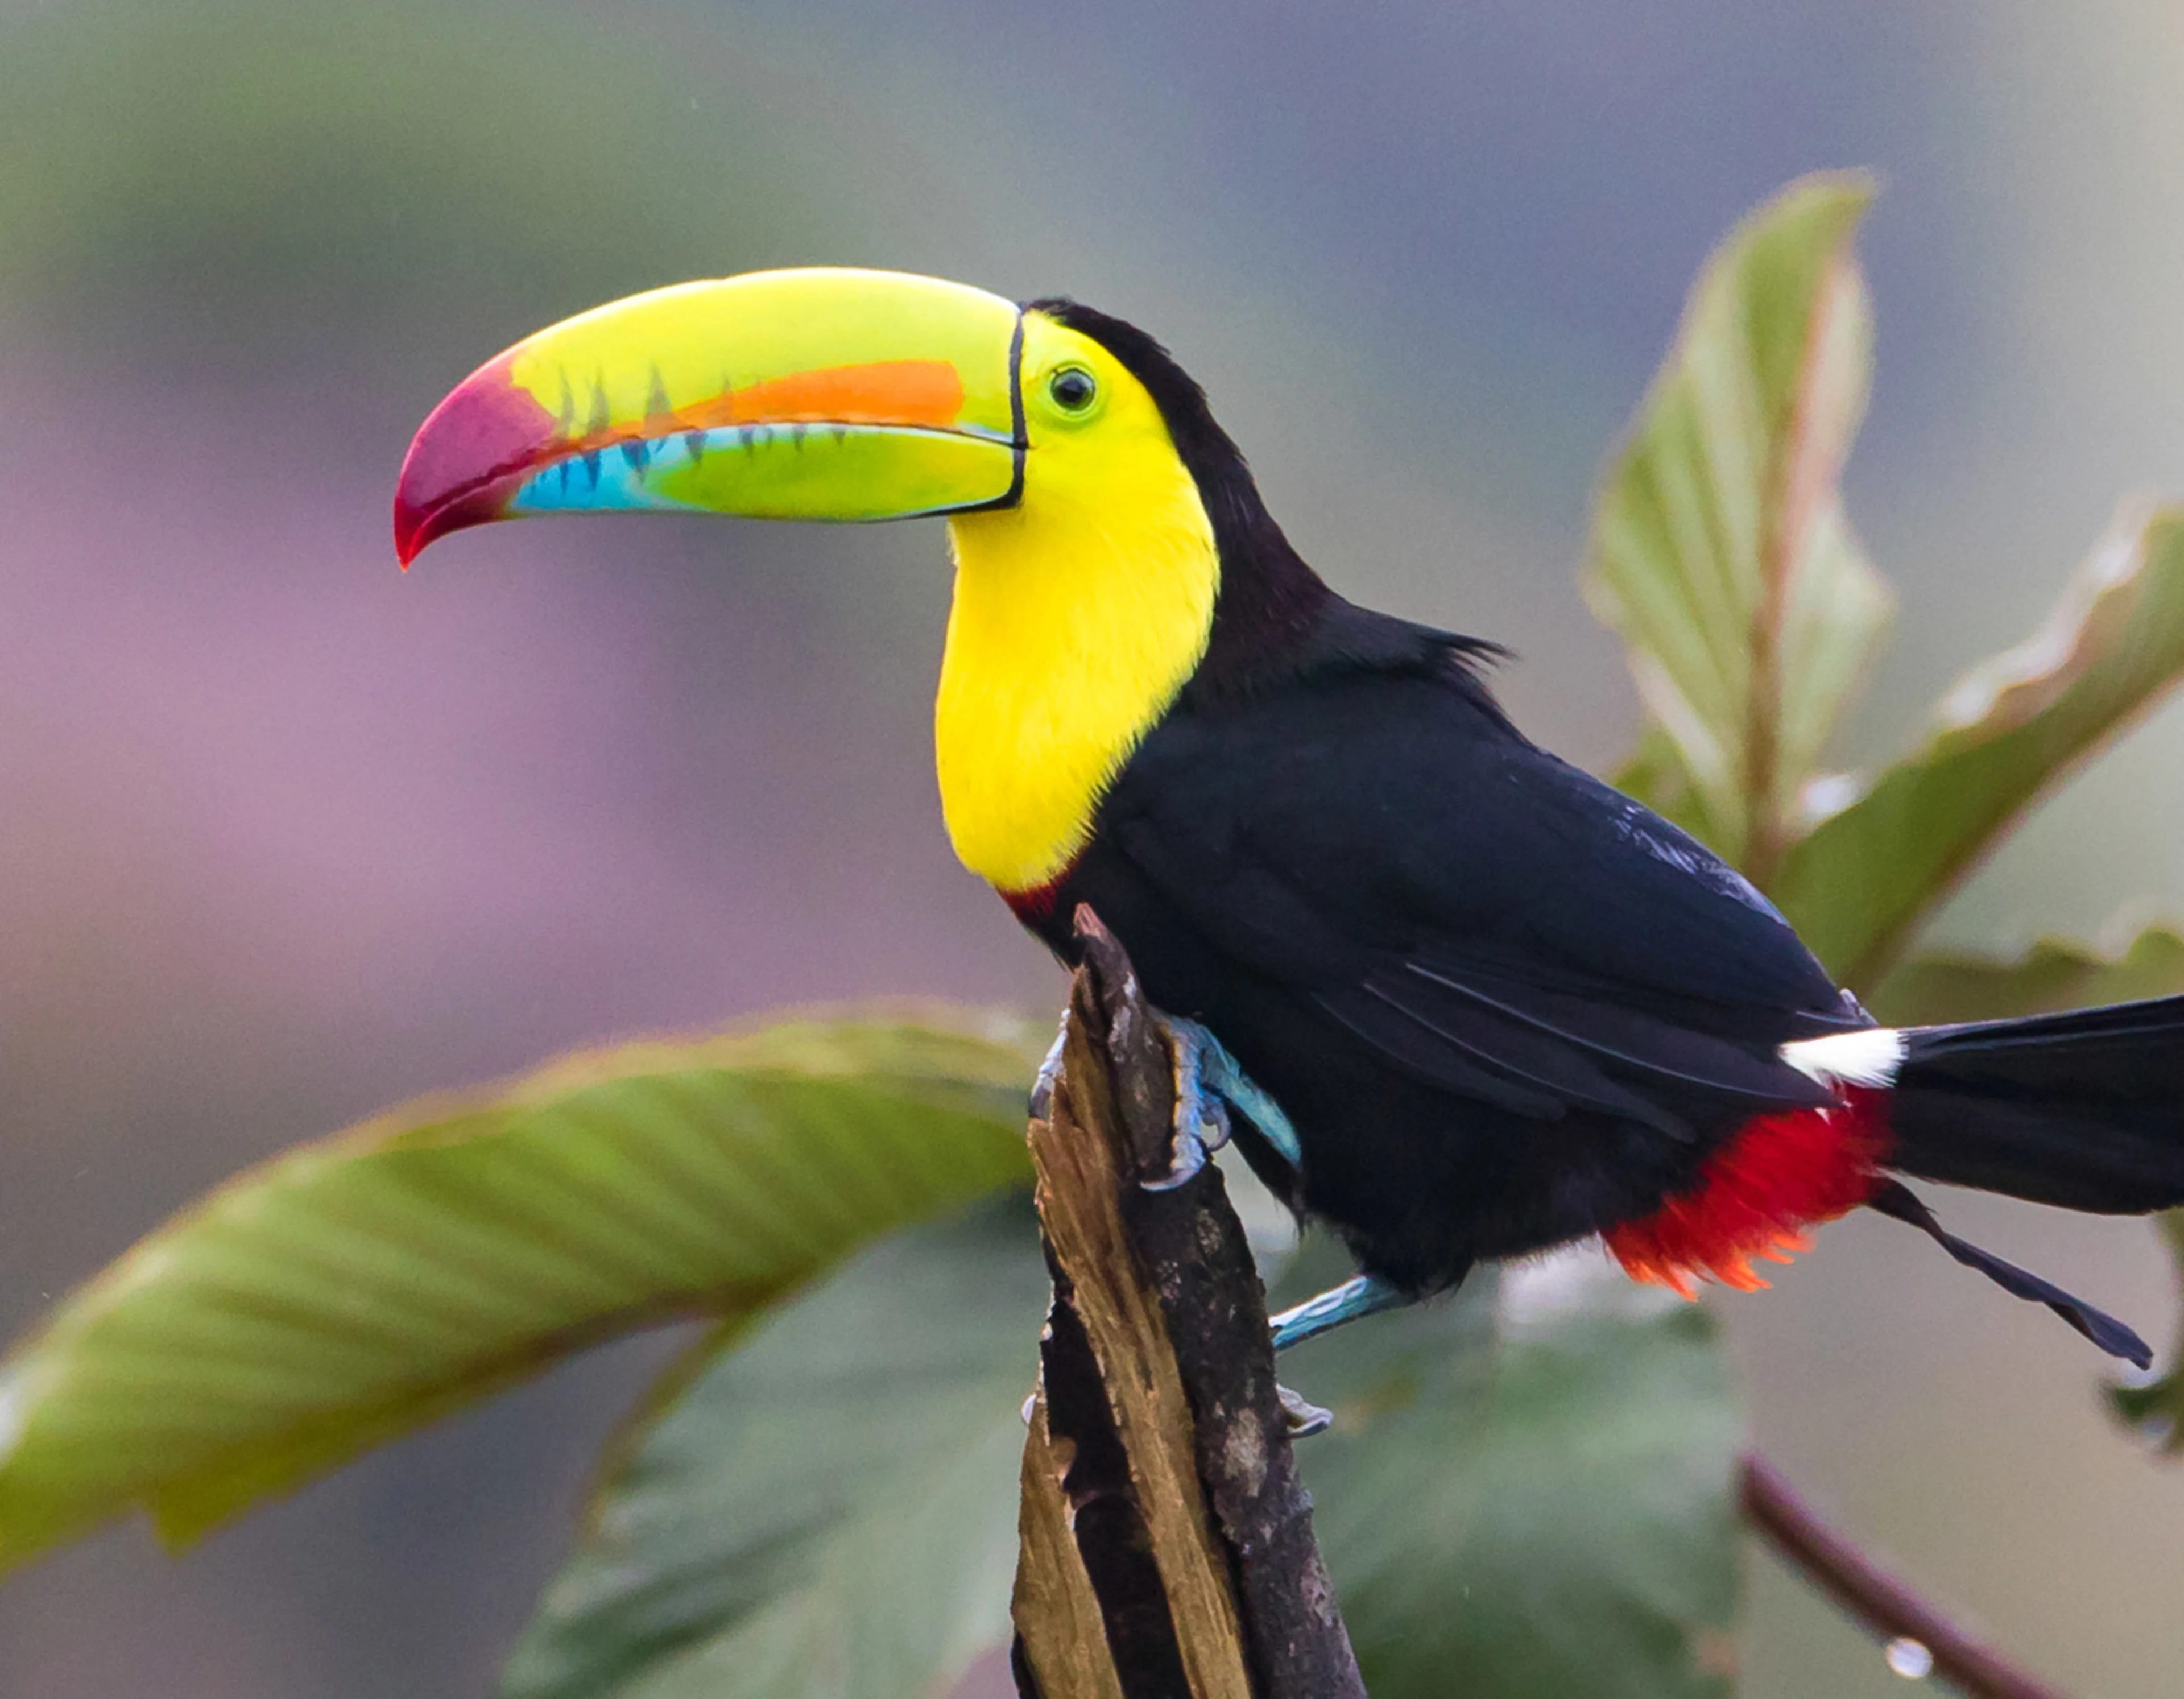 Keel billed Toucan, a black bird with a yellow and colorful head and peek sitting in a tree.